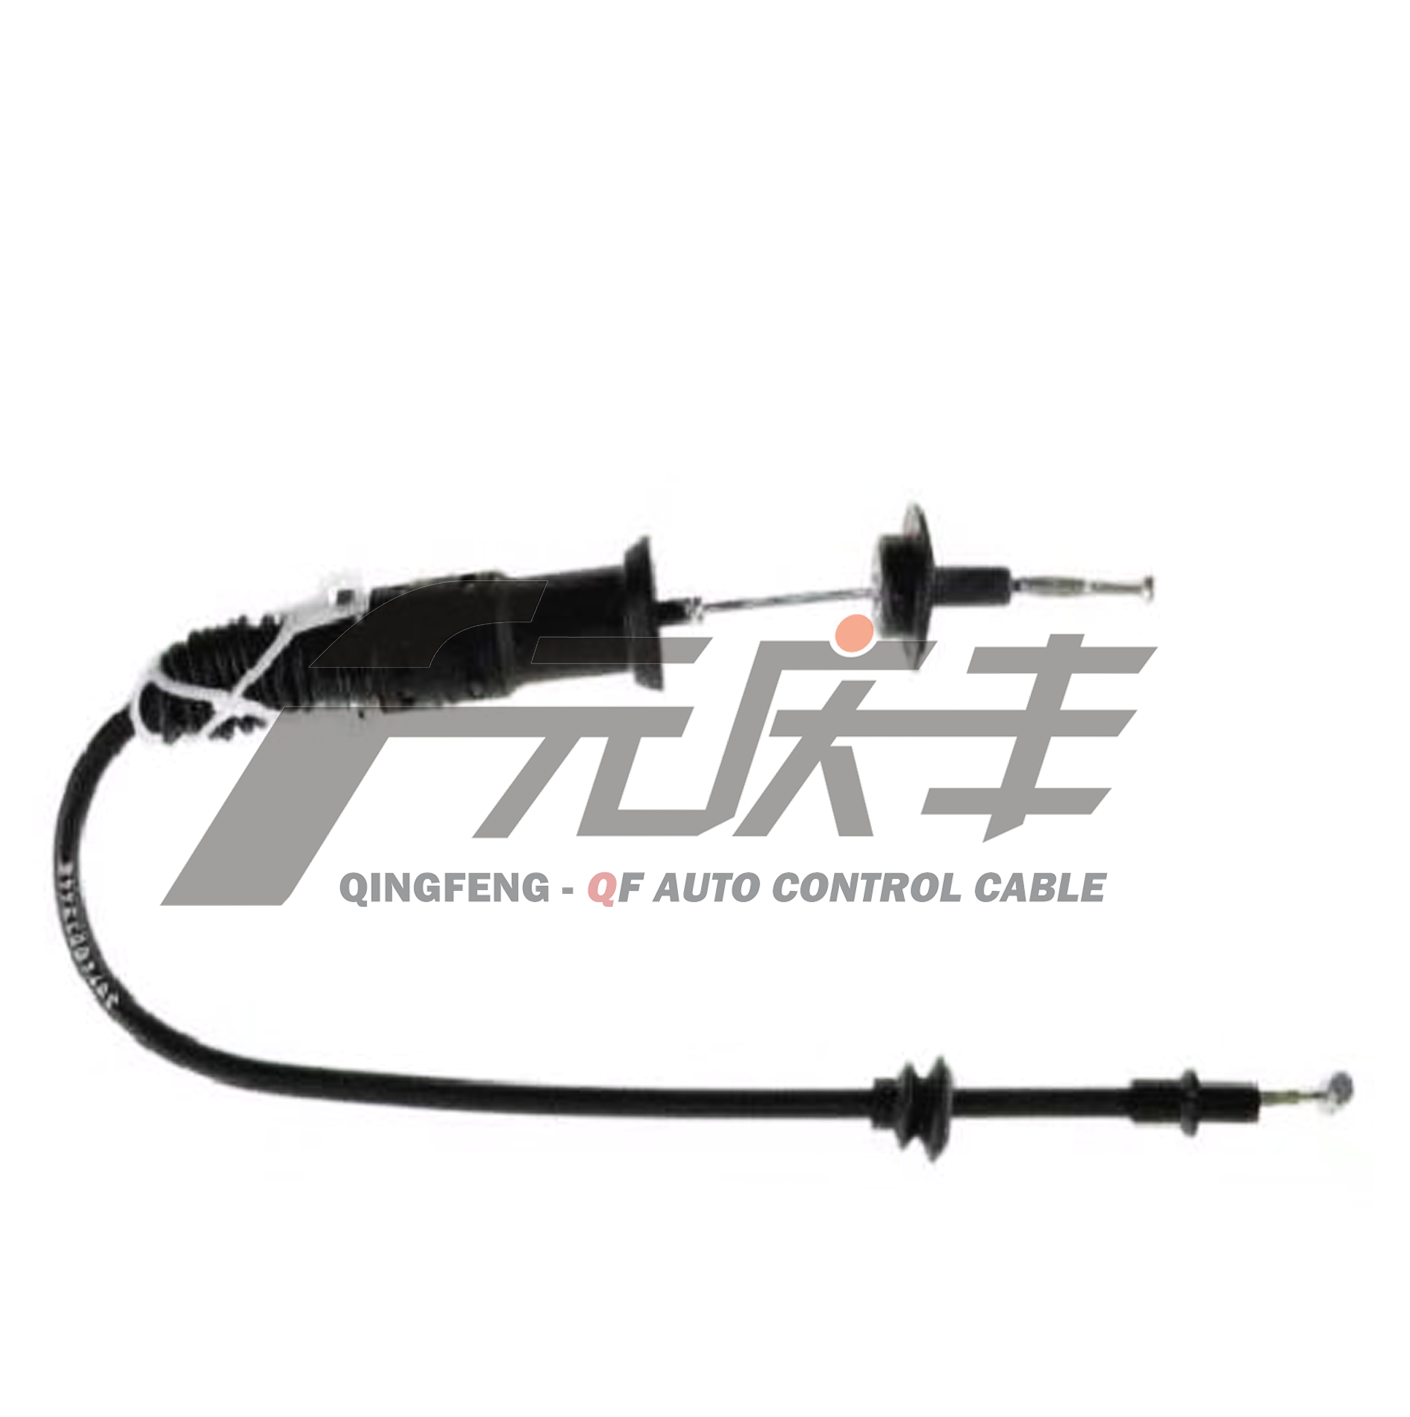 6K1 721 335C Auto clutch cable for Golf